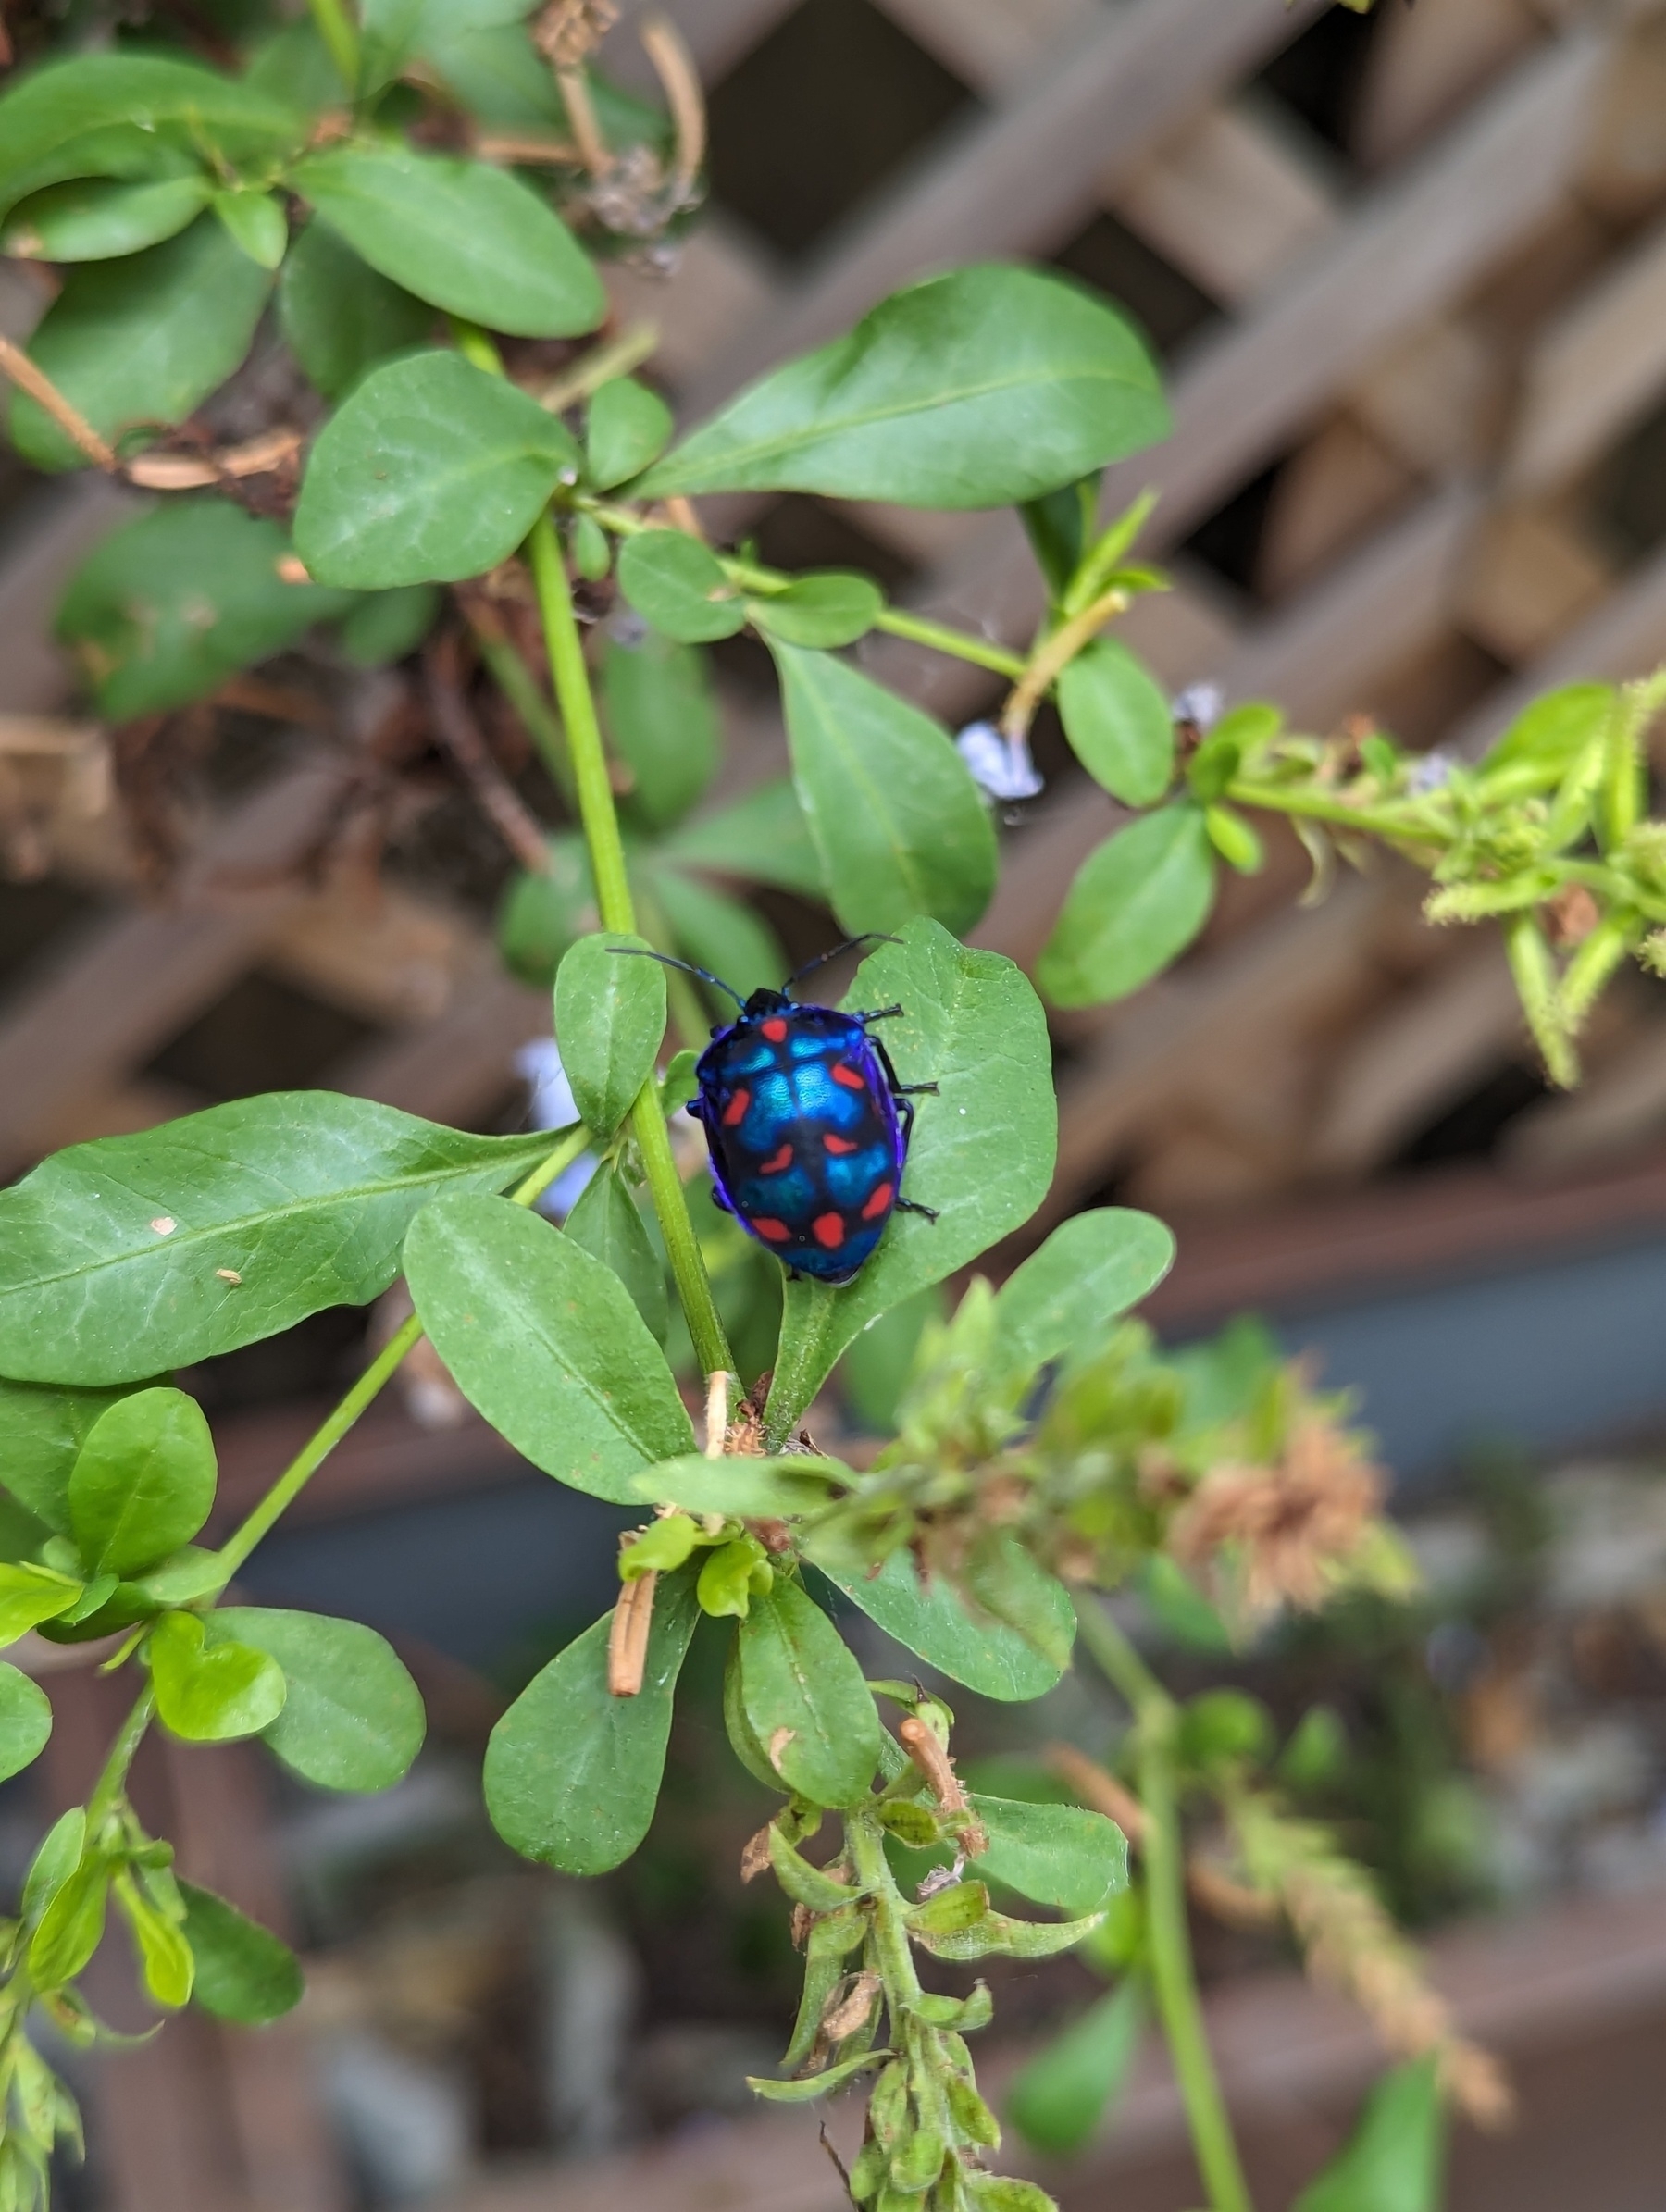 A shiny blue beetle with red spots rests on a leafy branch